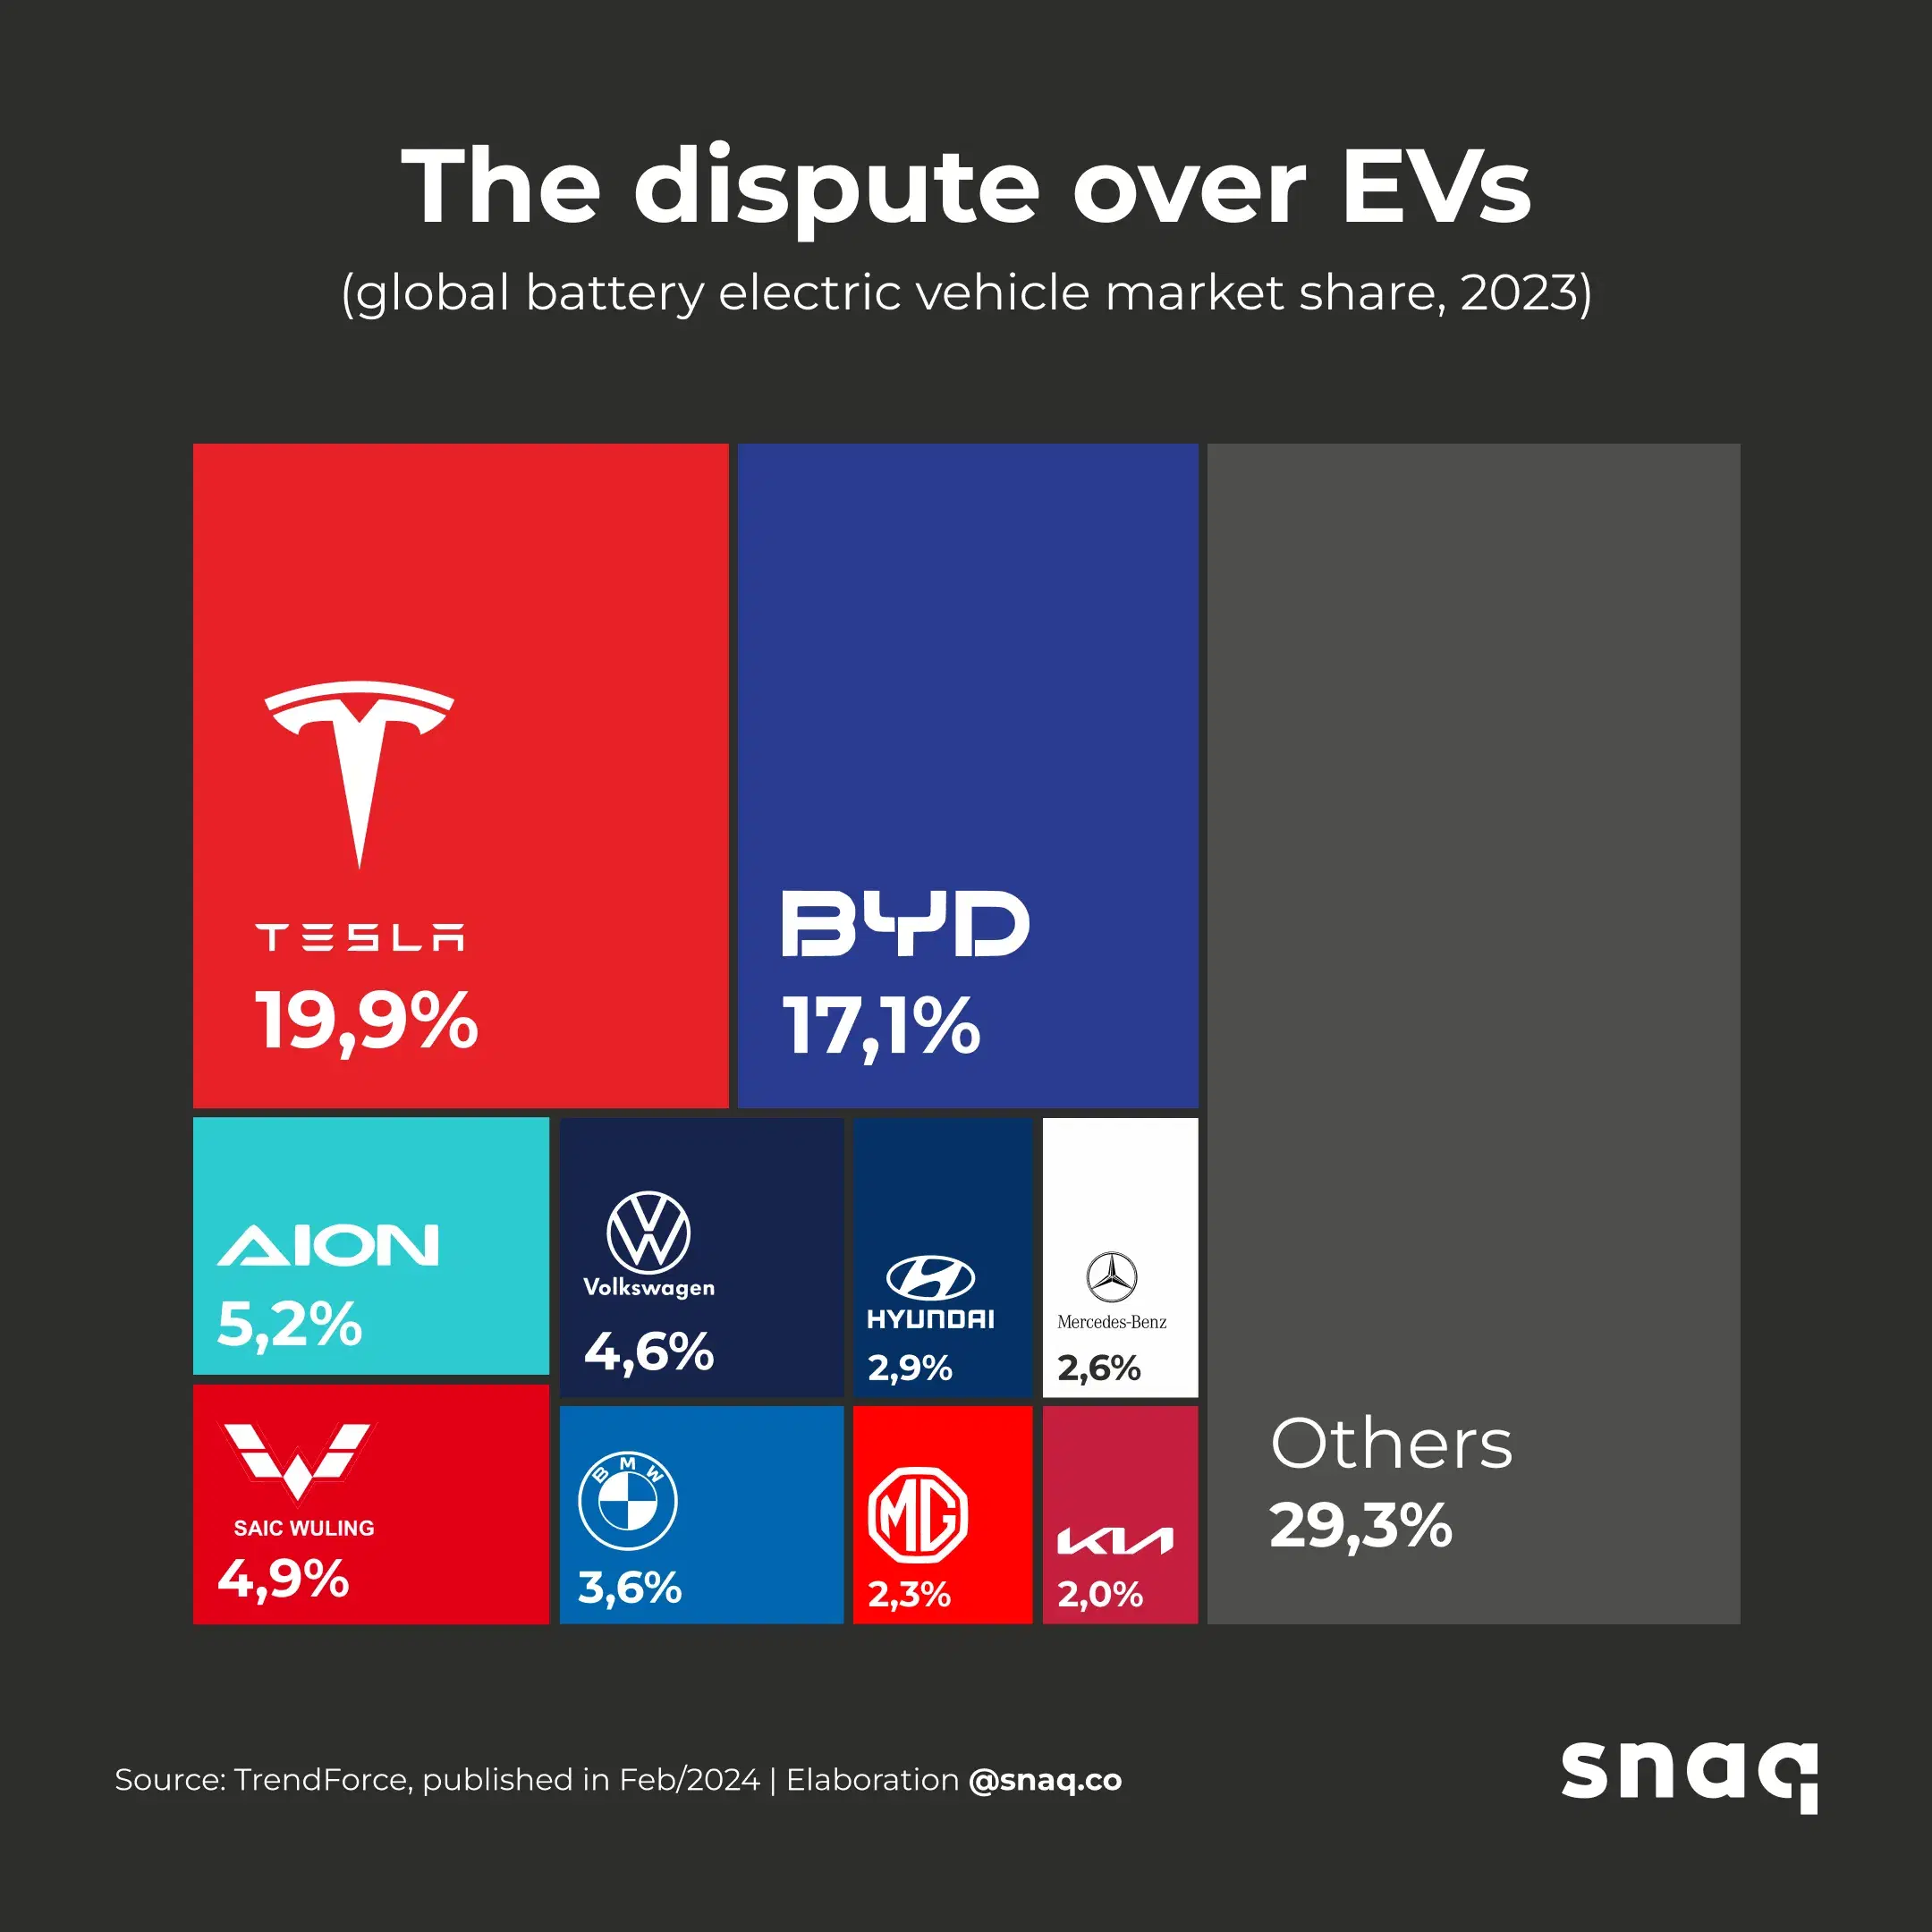 The dispute over EVs